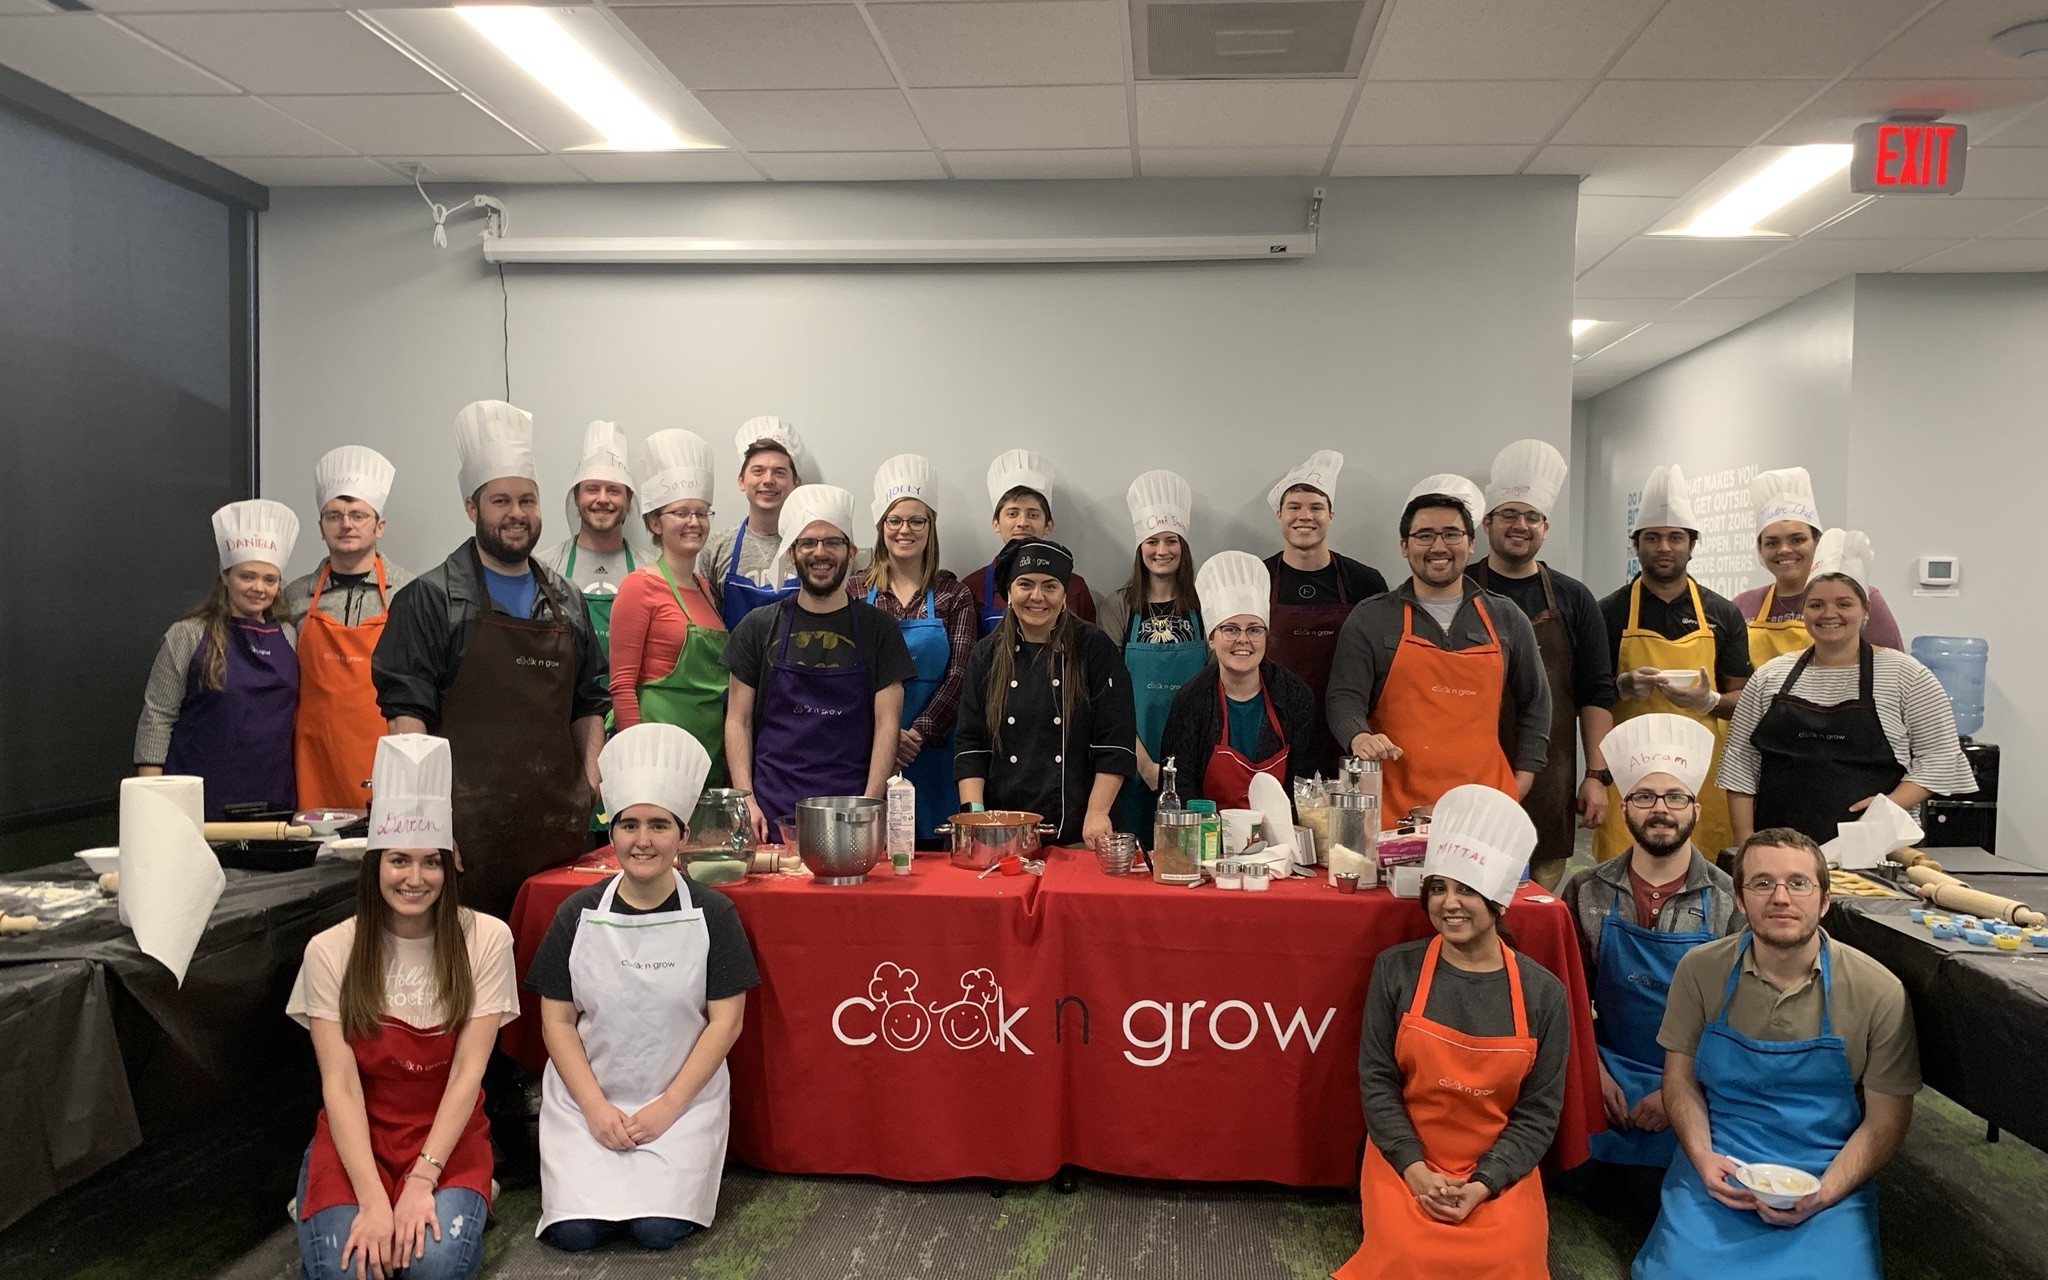 Cook n grow event